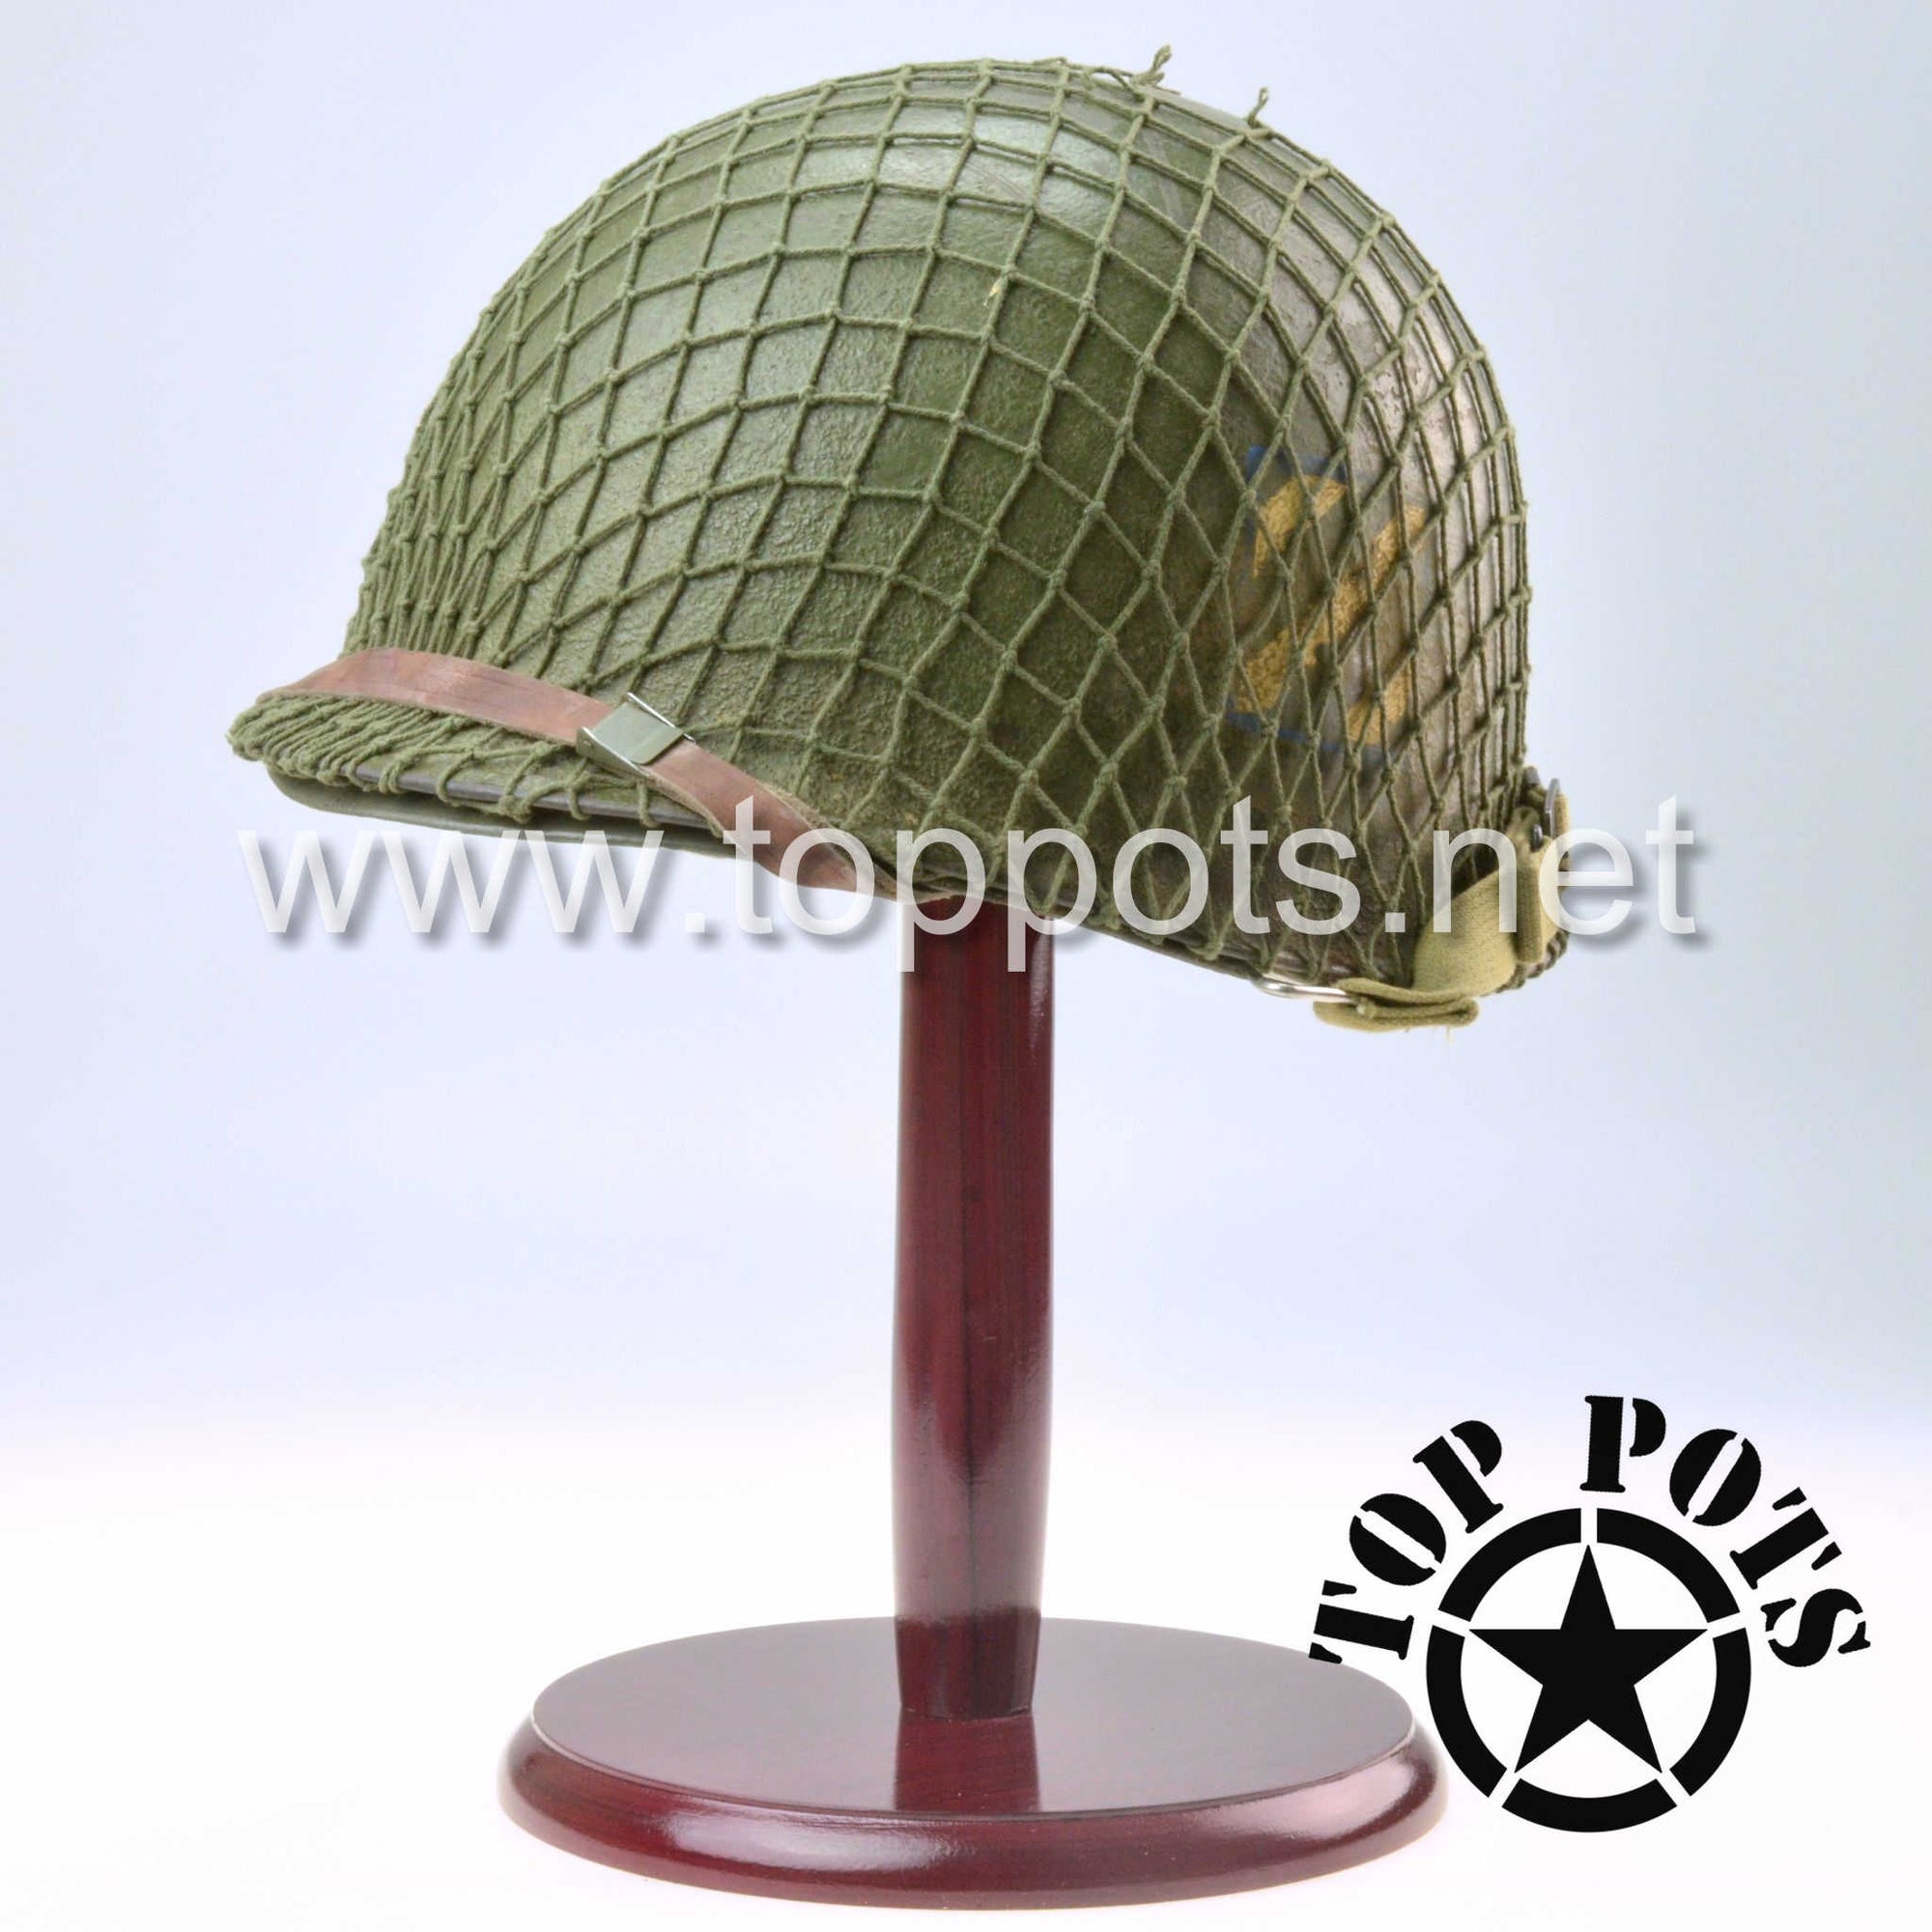 Featured Helmet - TWO WWII US Army Aged Original M1 Infantry Helmet Swivel Bale Shells and Liners with 3rd Infantry Division Emblems, Nets & Display Stands (SET OF TWO)